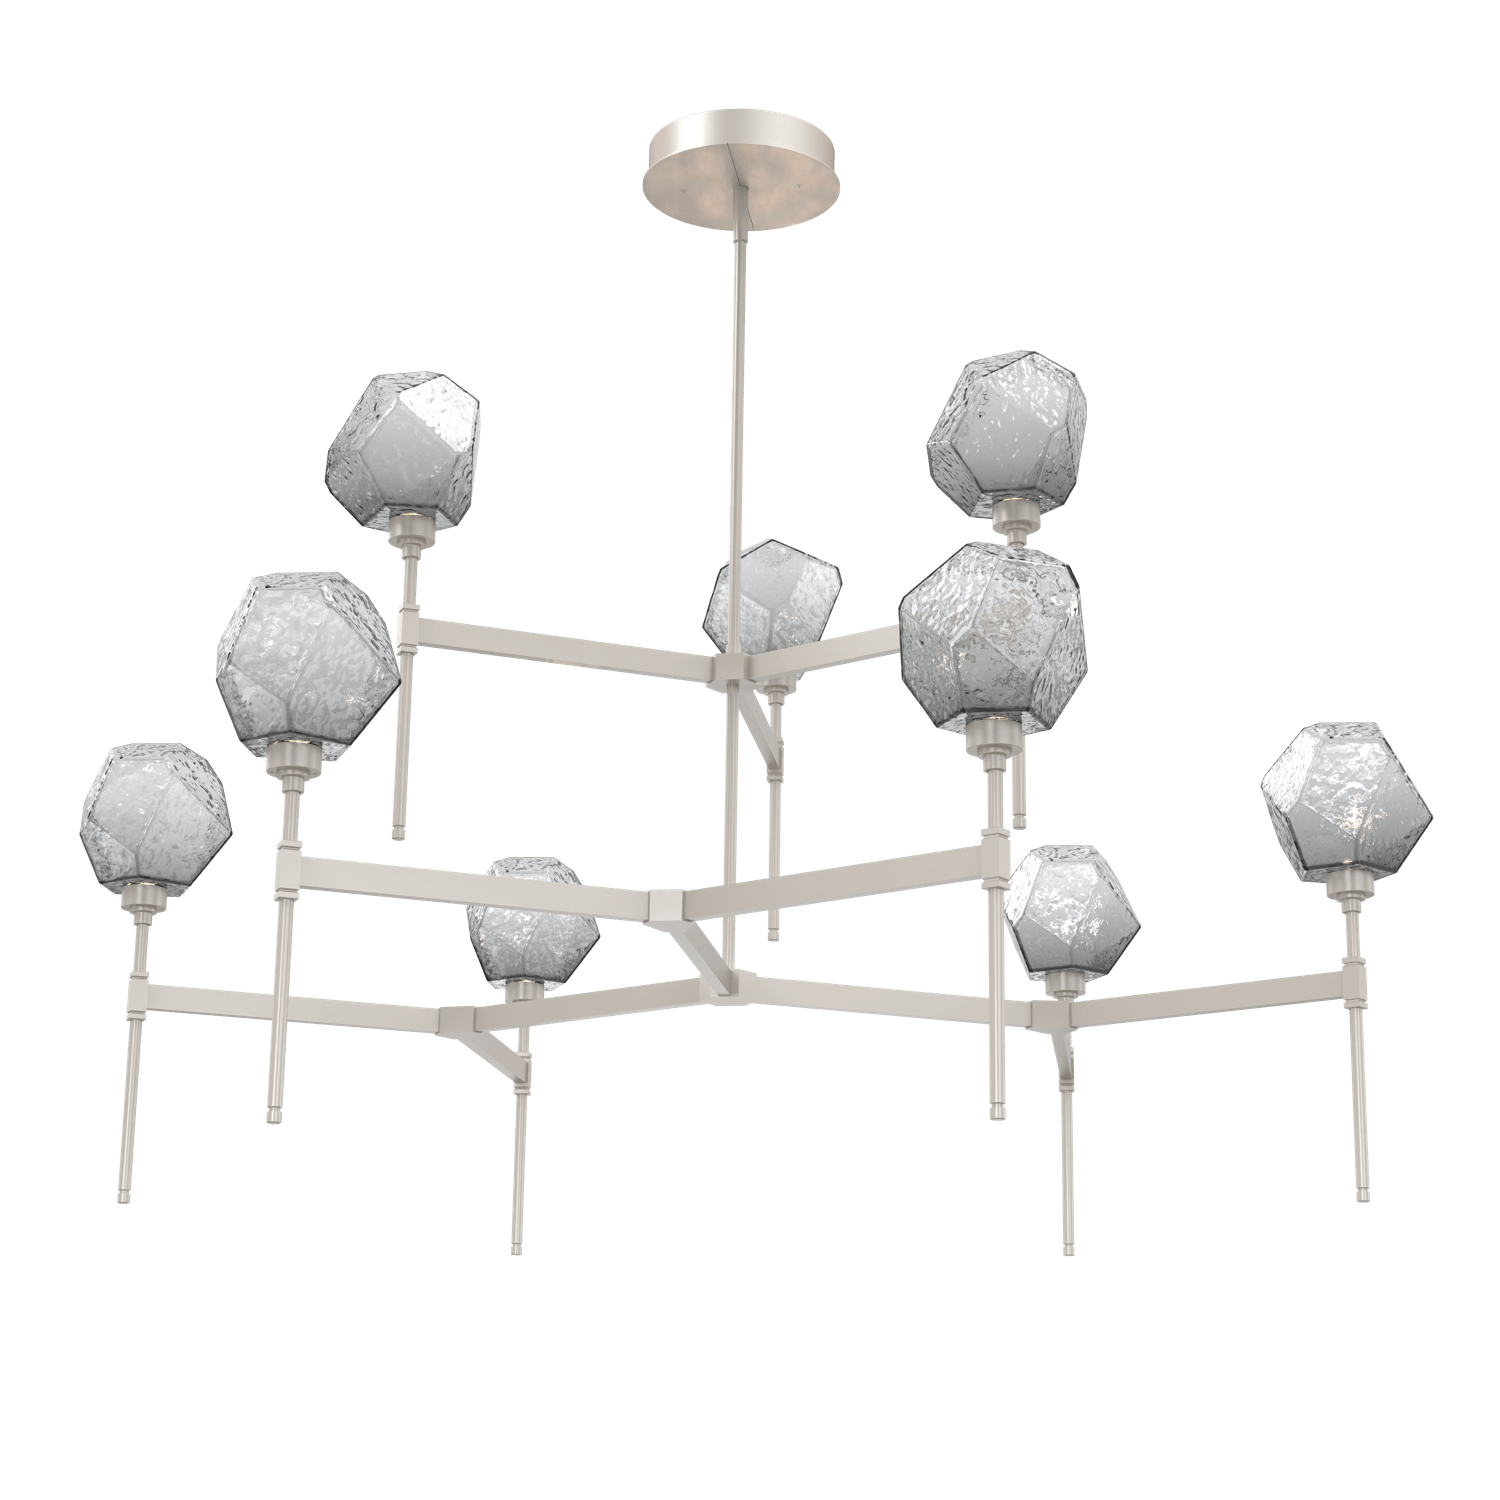 CHB0039-55-BS-S-Hammerton-Studio-Gem-round-two-tier-belvedere-chandelier-with-metallic-beige-silver-finish-and-smoke-blown-glass-shades-and-LED-lamping